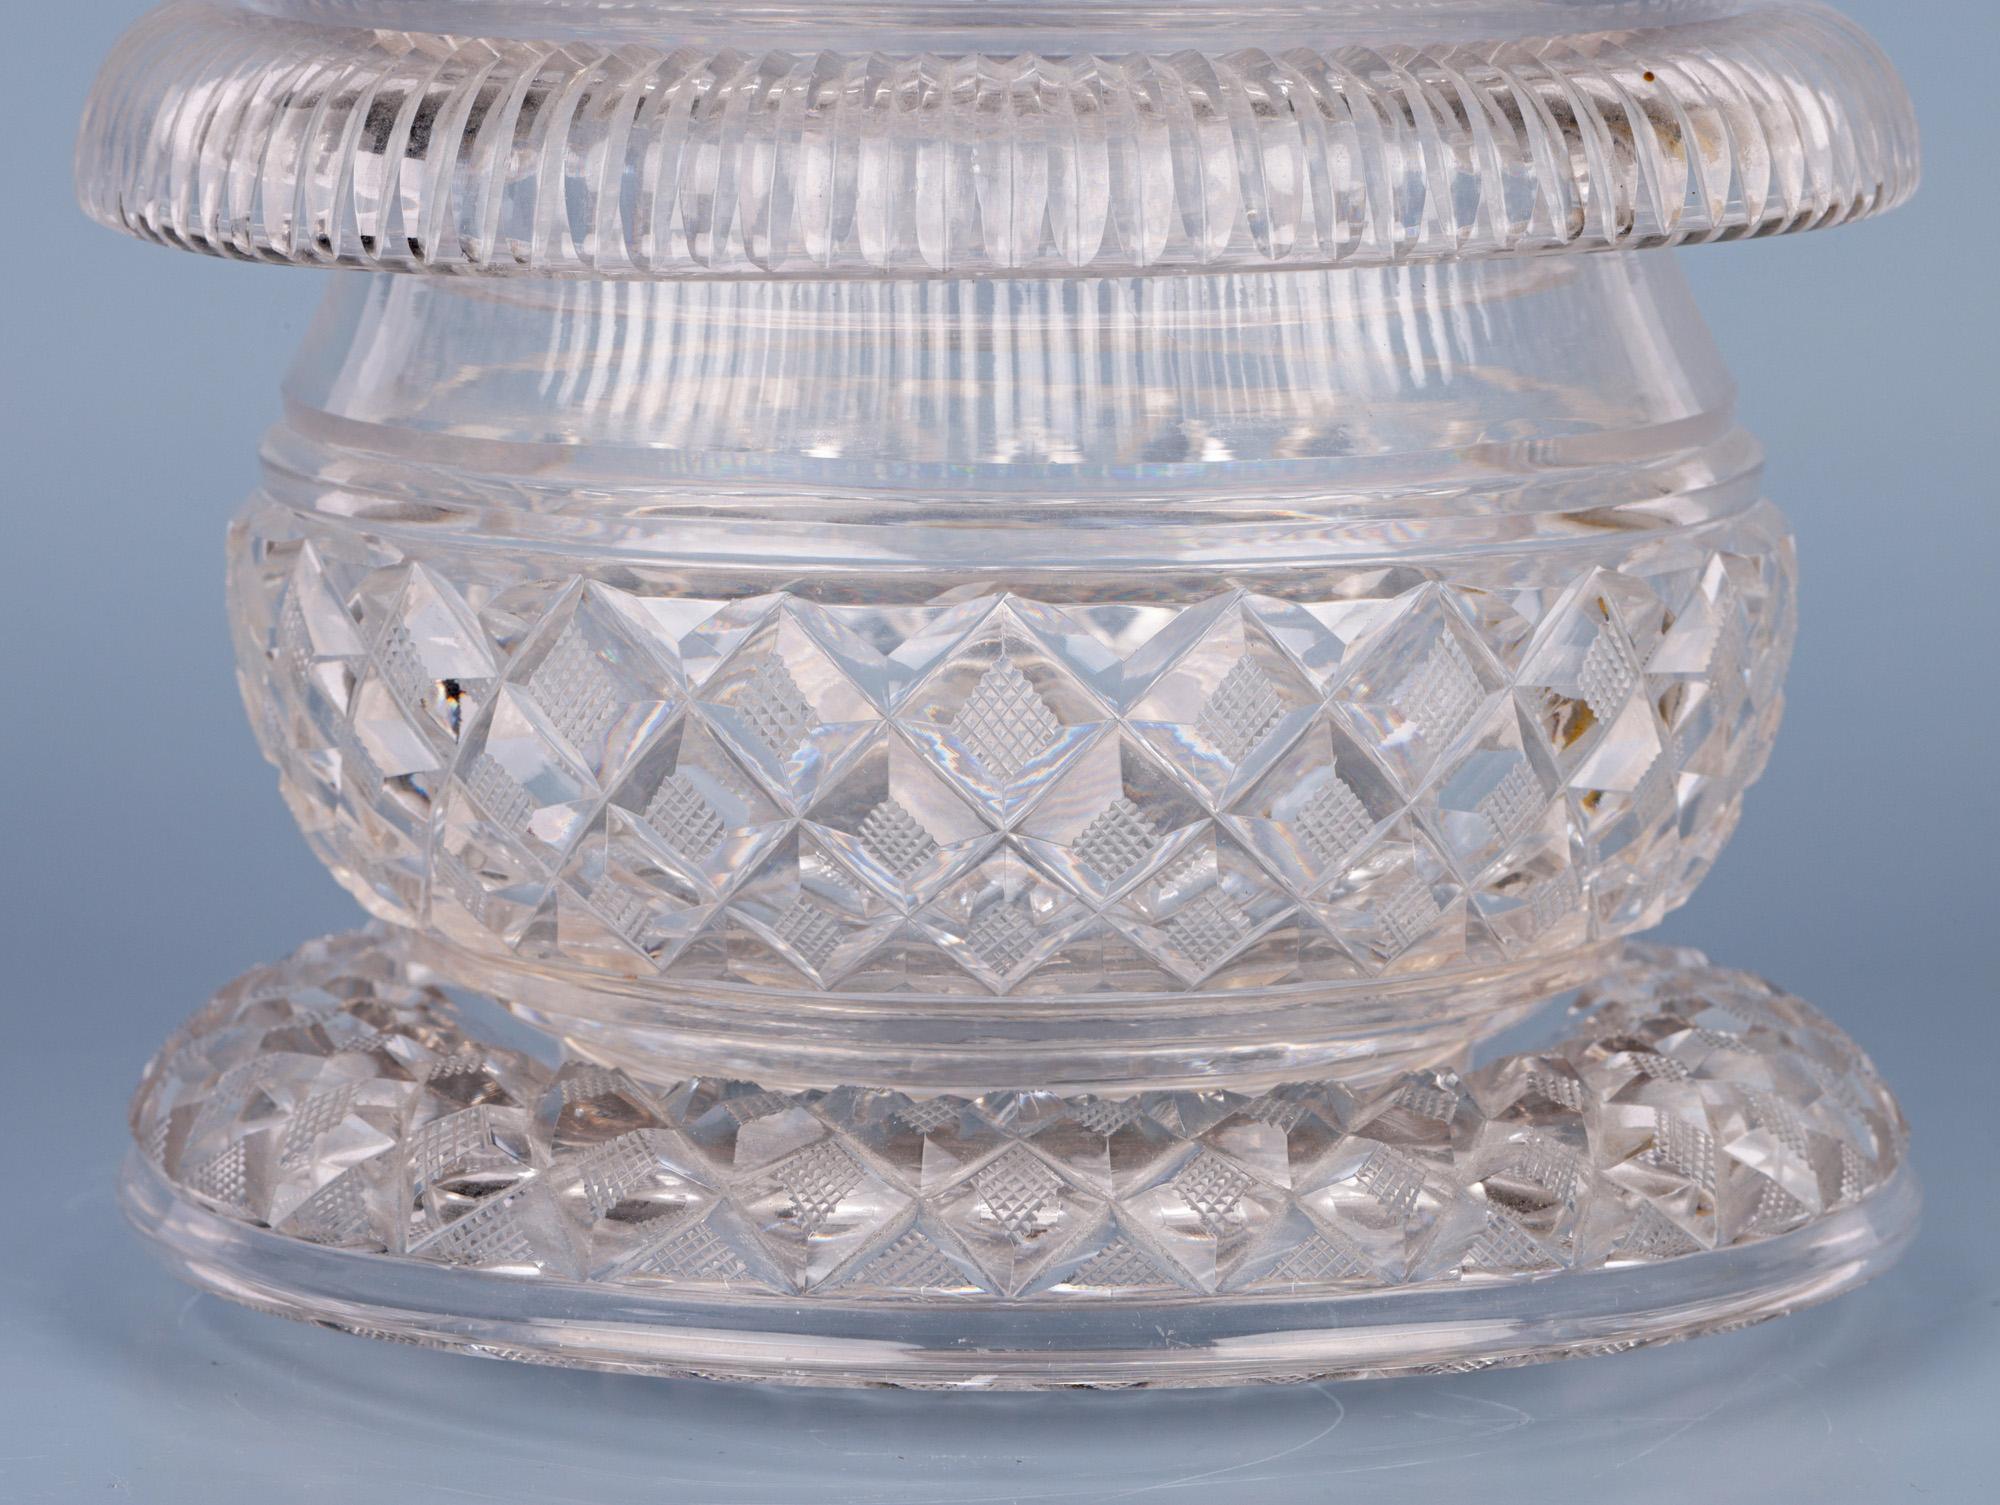 A very fine antique cut glass lidded butter dish on matching stand dating from around 1825. The butter dish is of wide rounded shape and has a narrow round cut foot which sits within the recess of the stand and is decorated with diamond and prism